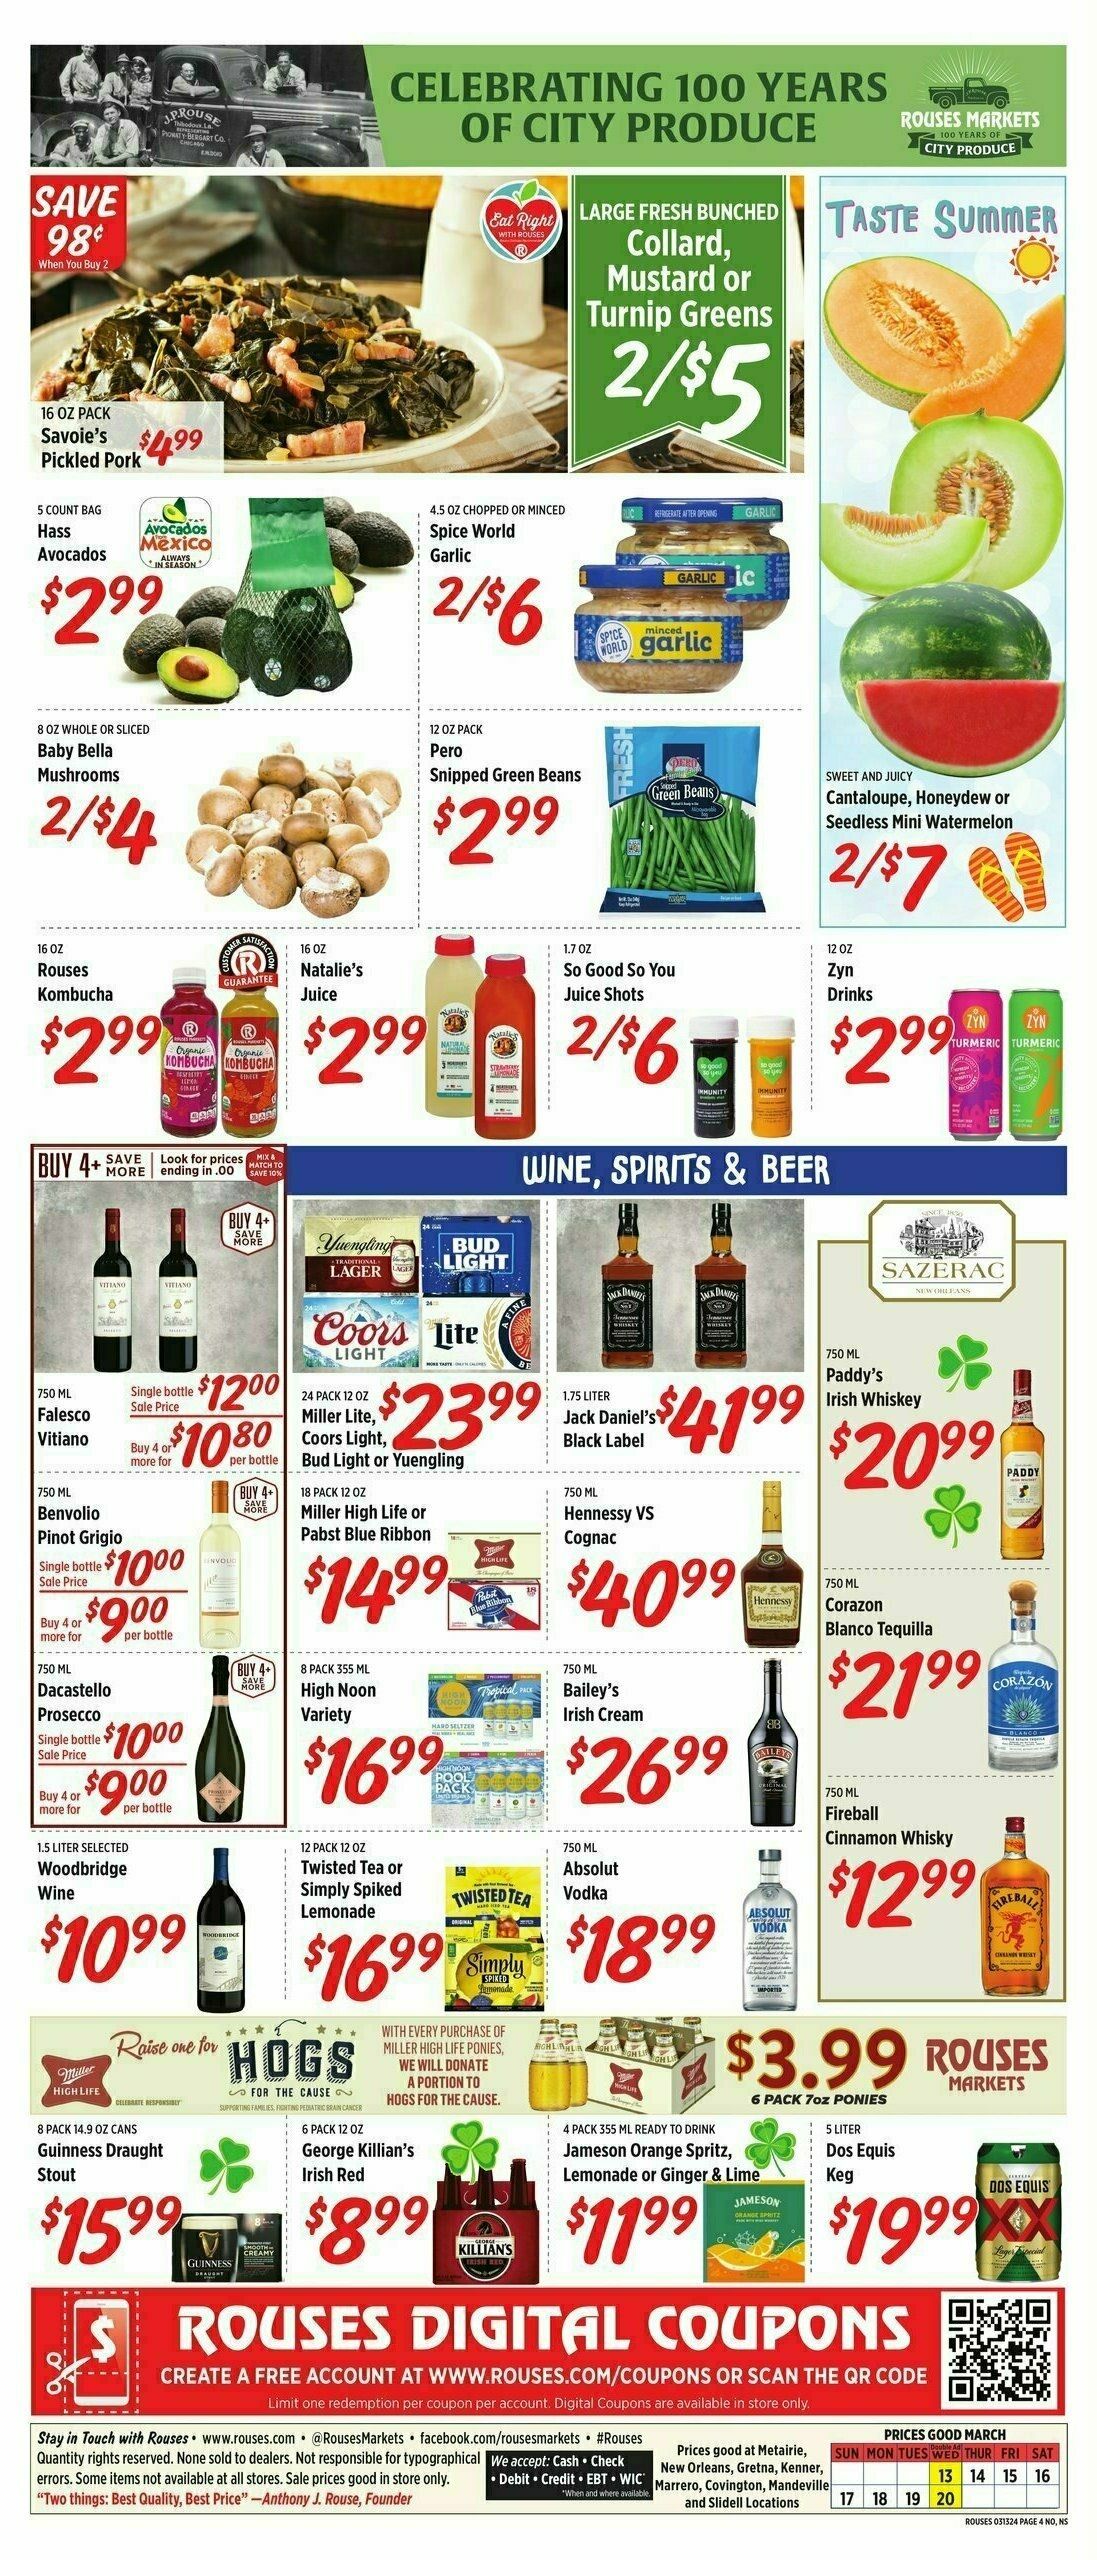 Rouses Markets Weekly Ad from March 13